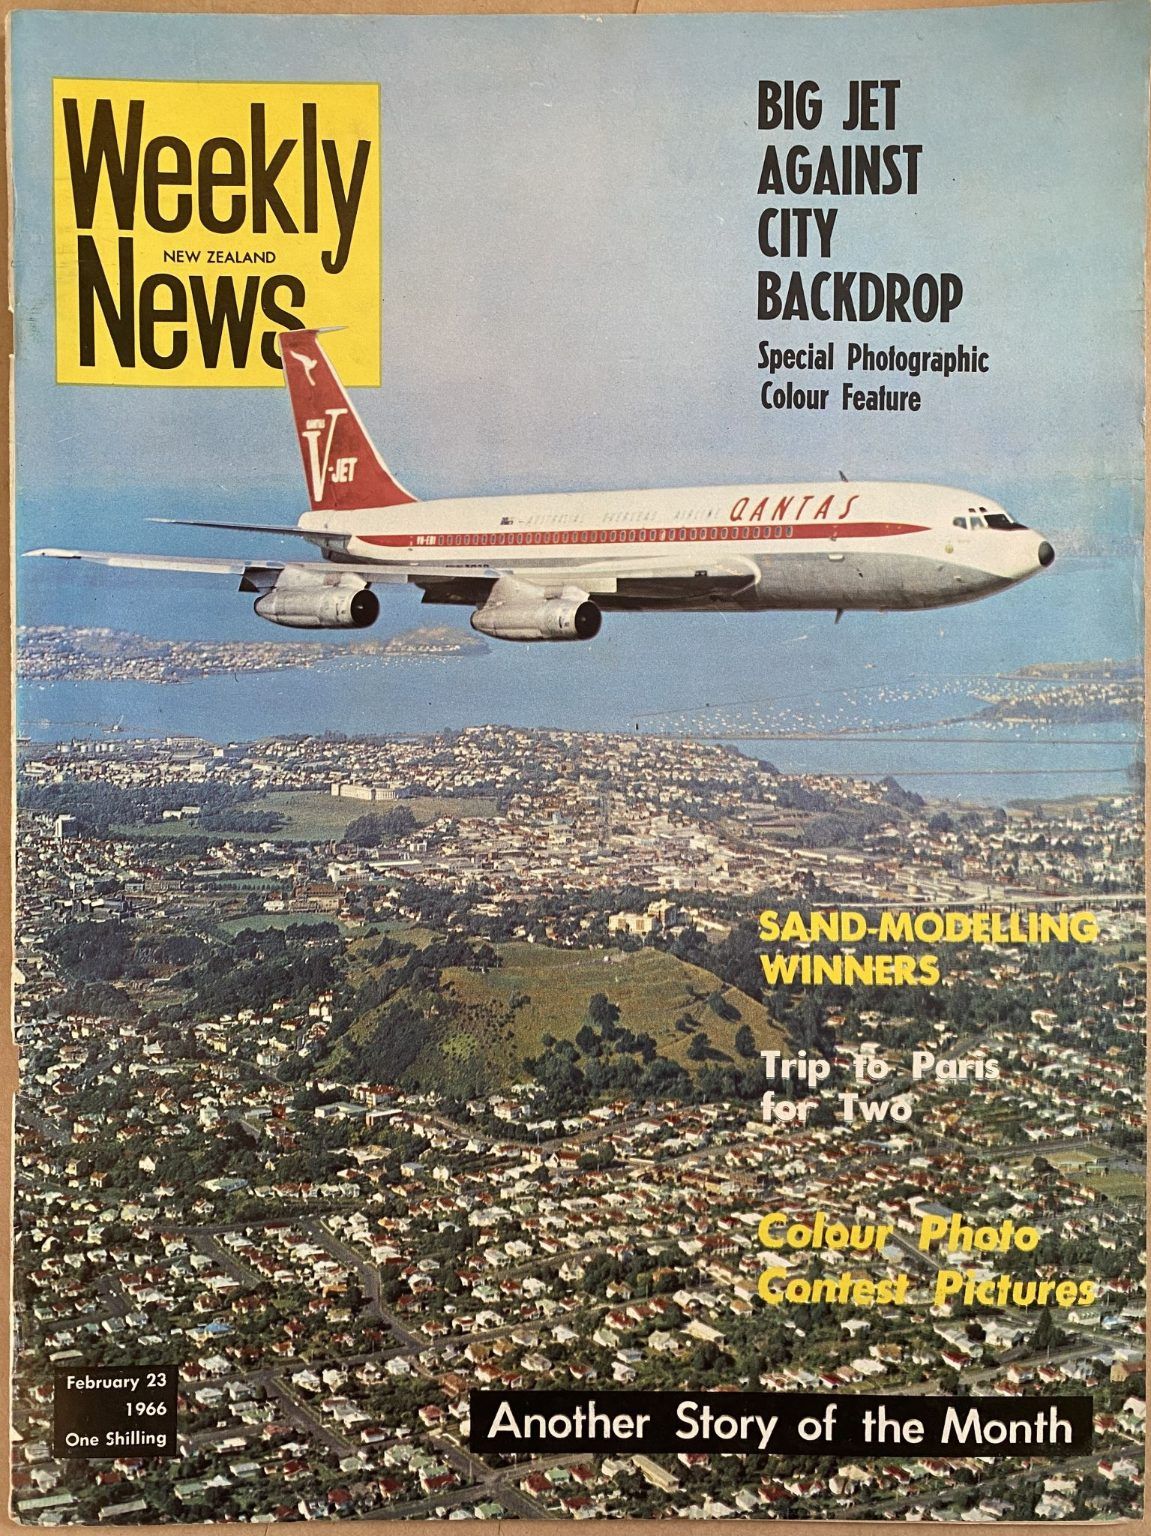 OLD NEWSPAPER: New Zealand Weekly News, No. 5335, 23 February 1966